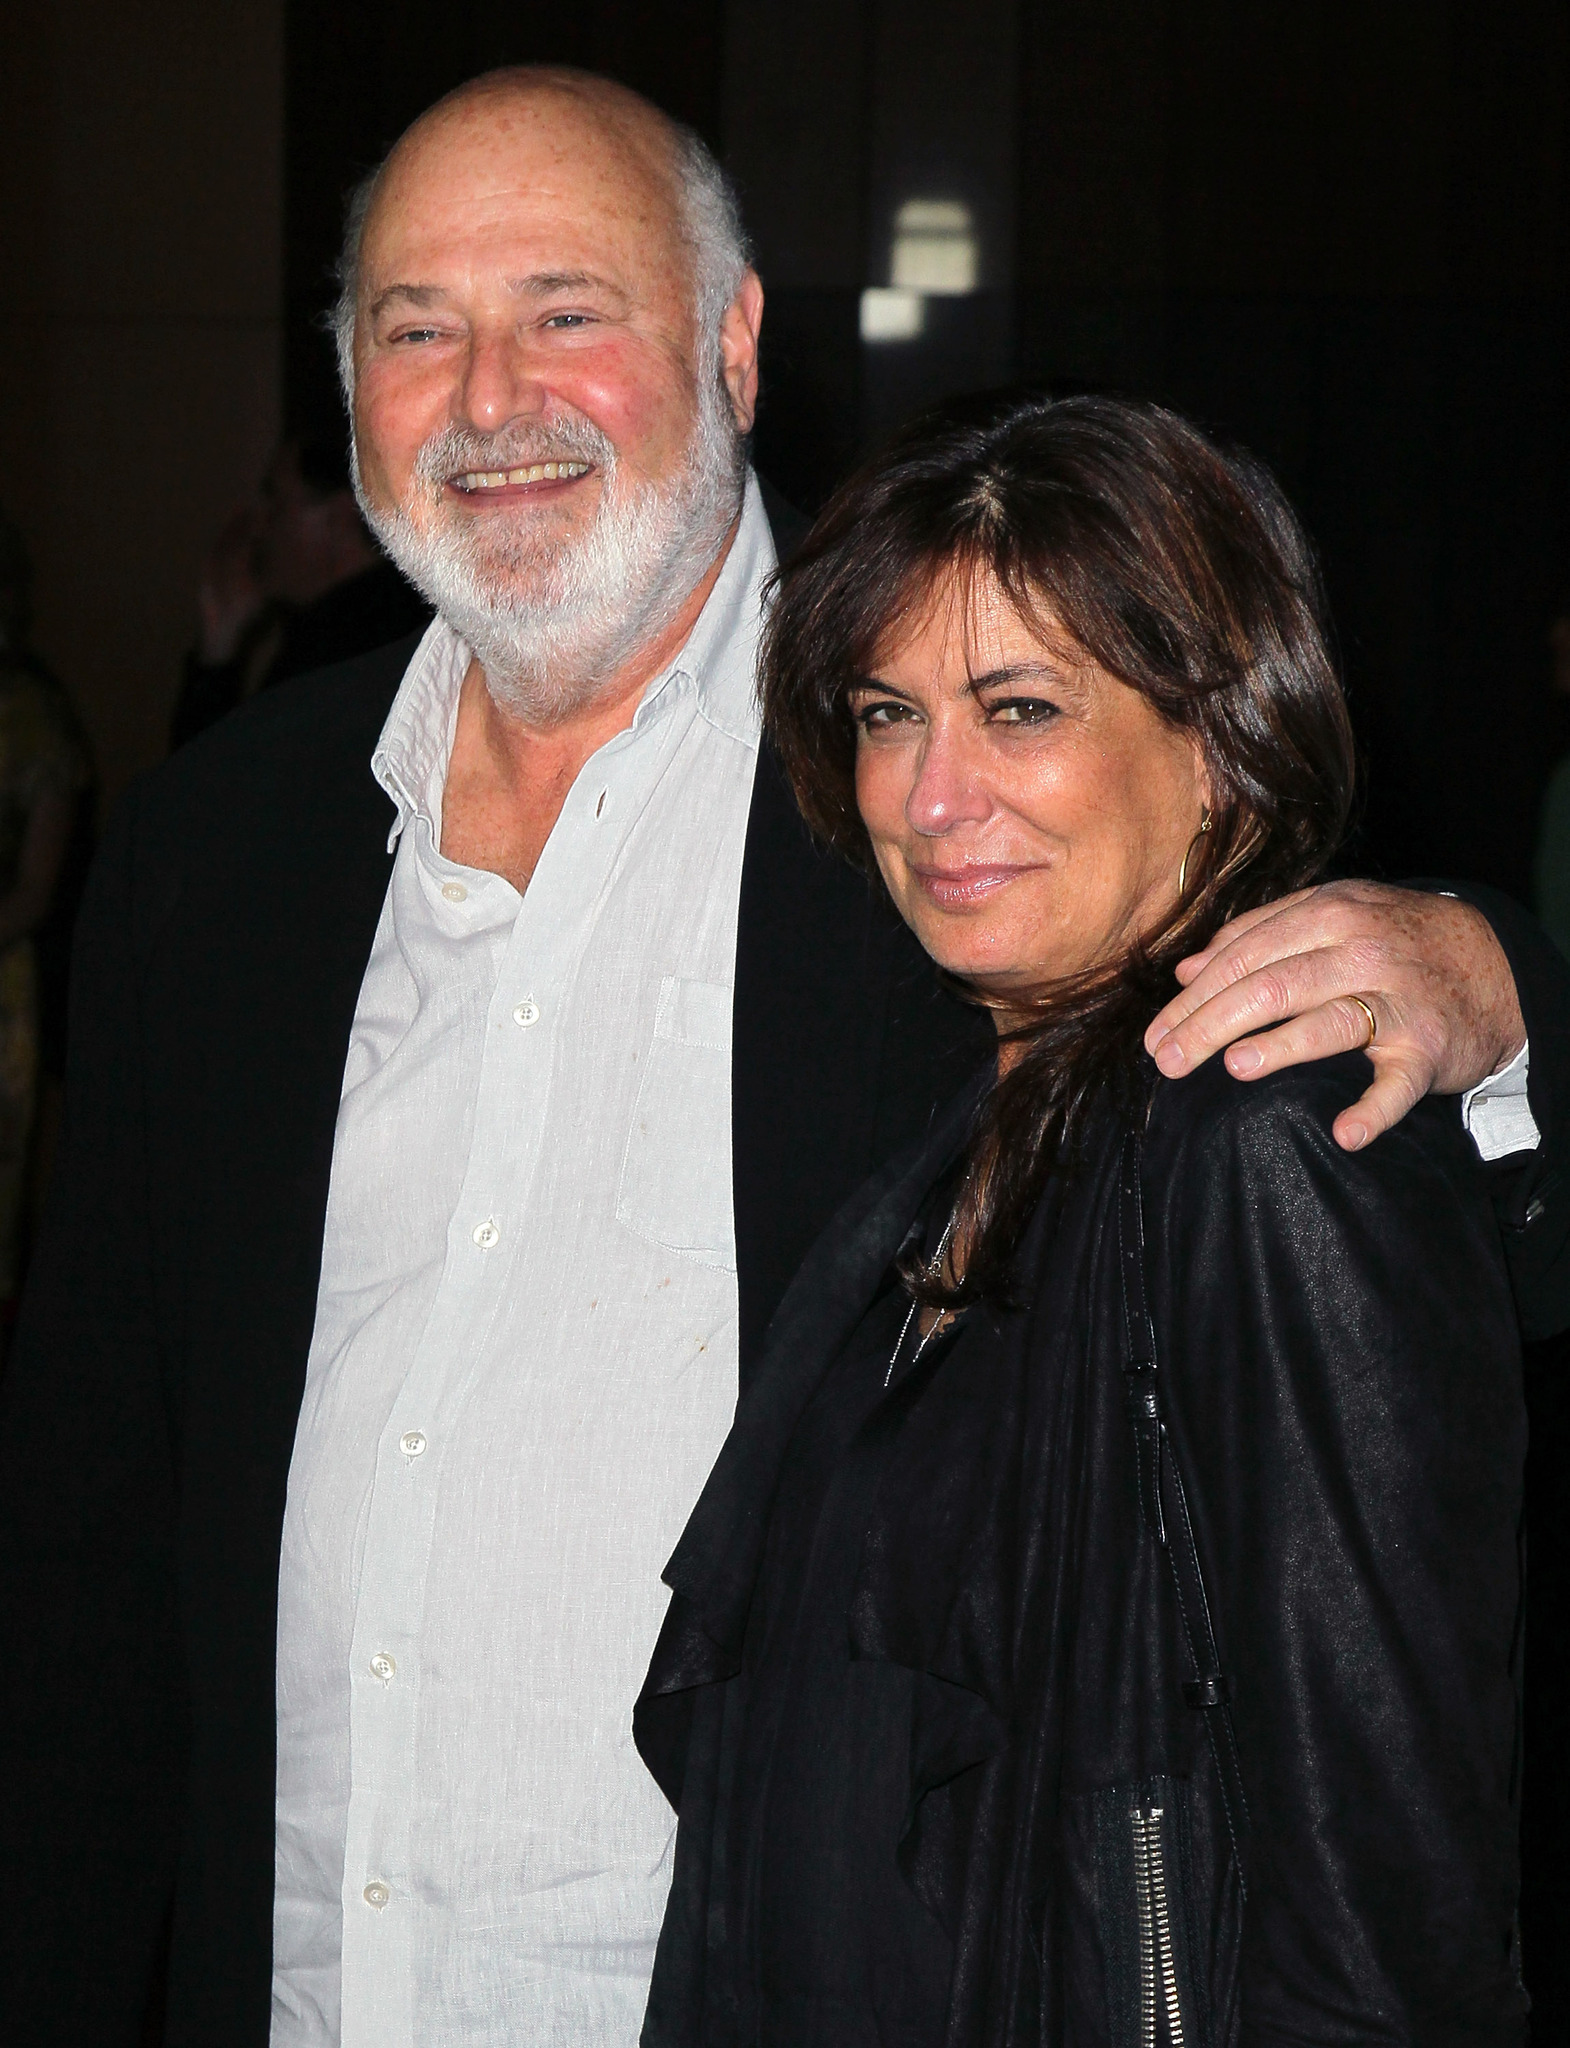 Rob Reiner and Michele Singer at event of The Magic of Belle Isle (2012)